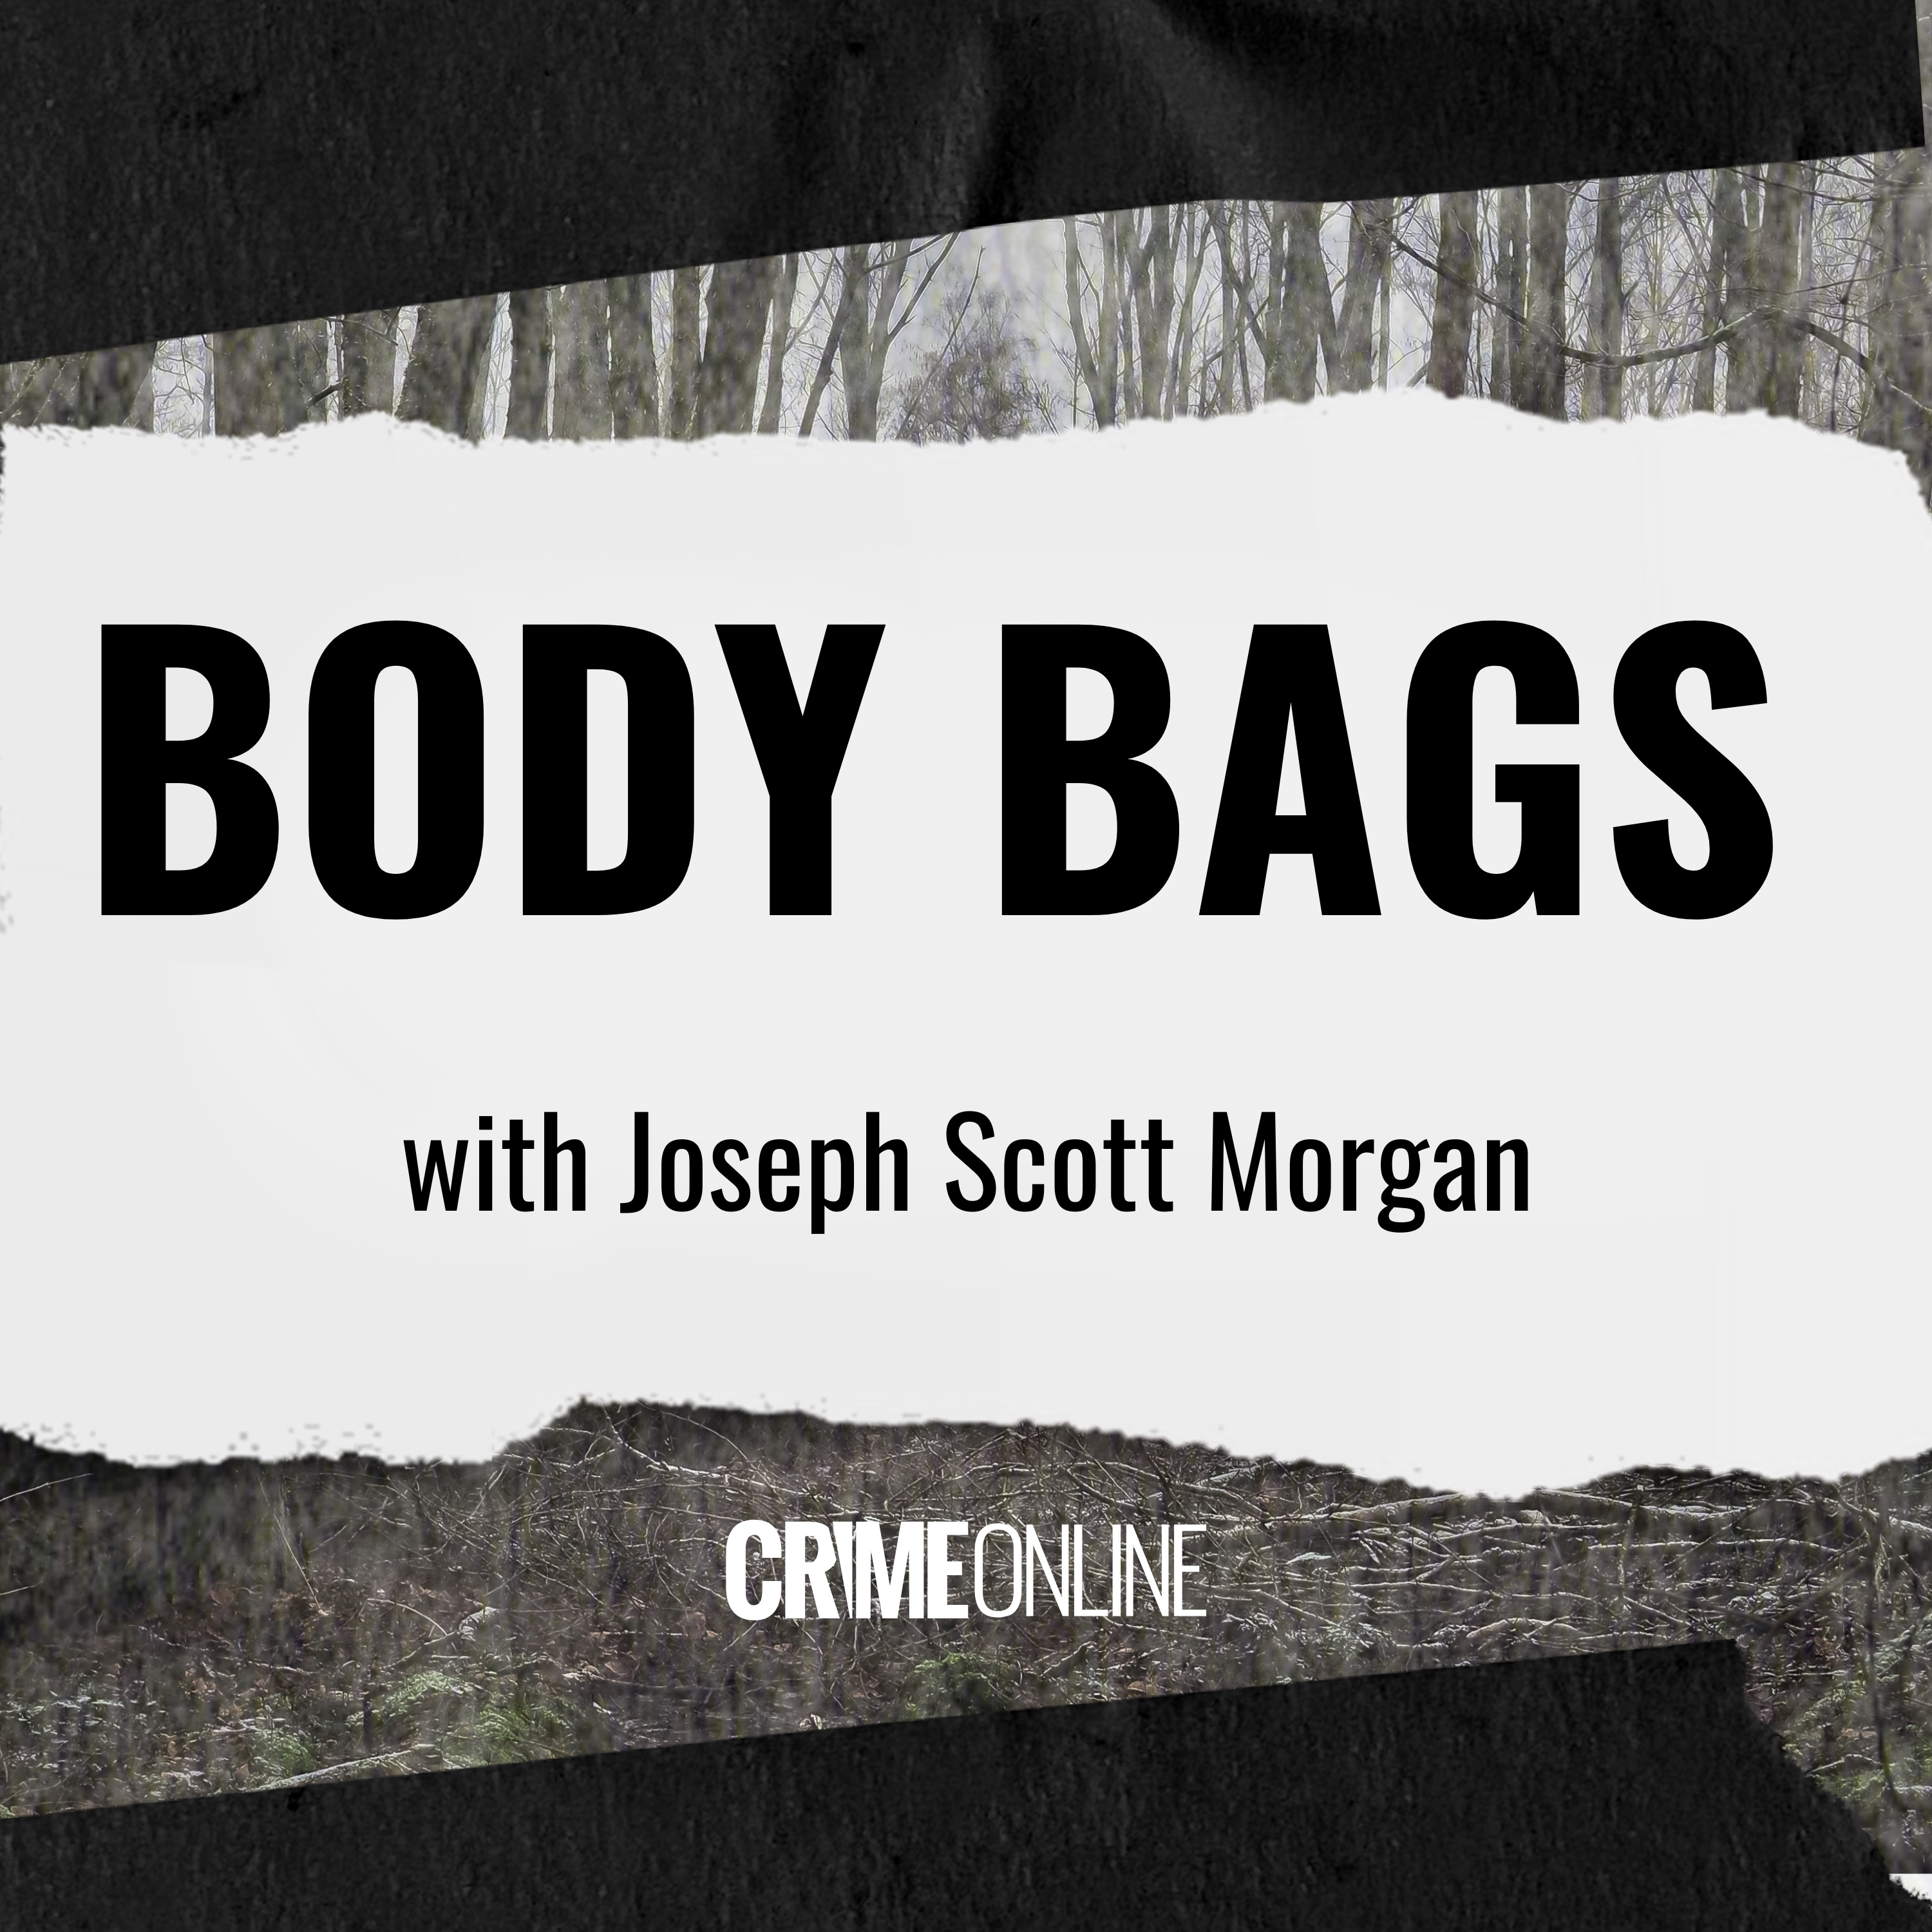 Body Bags with Joseph Scott Morgan: Murdered While Jogging - The Death of Laken Riley